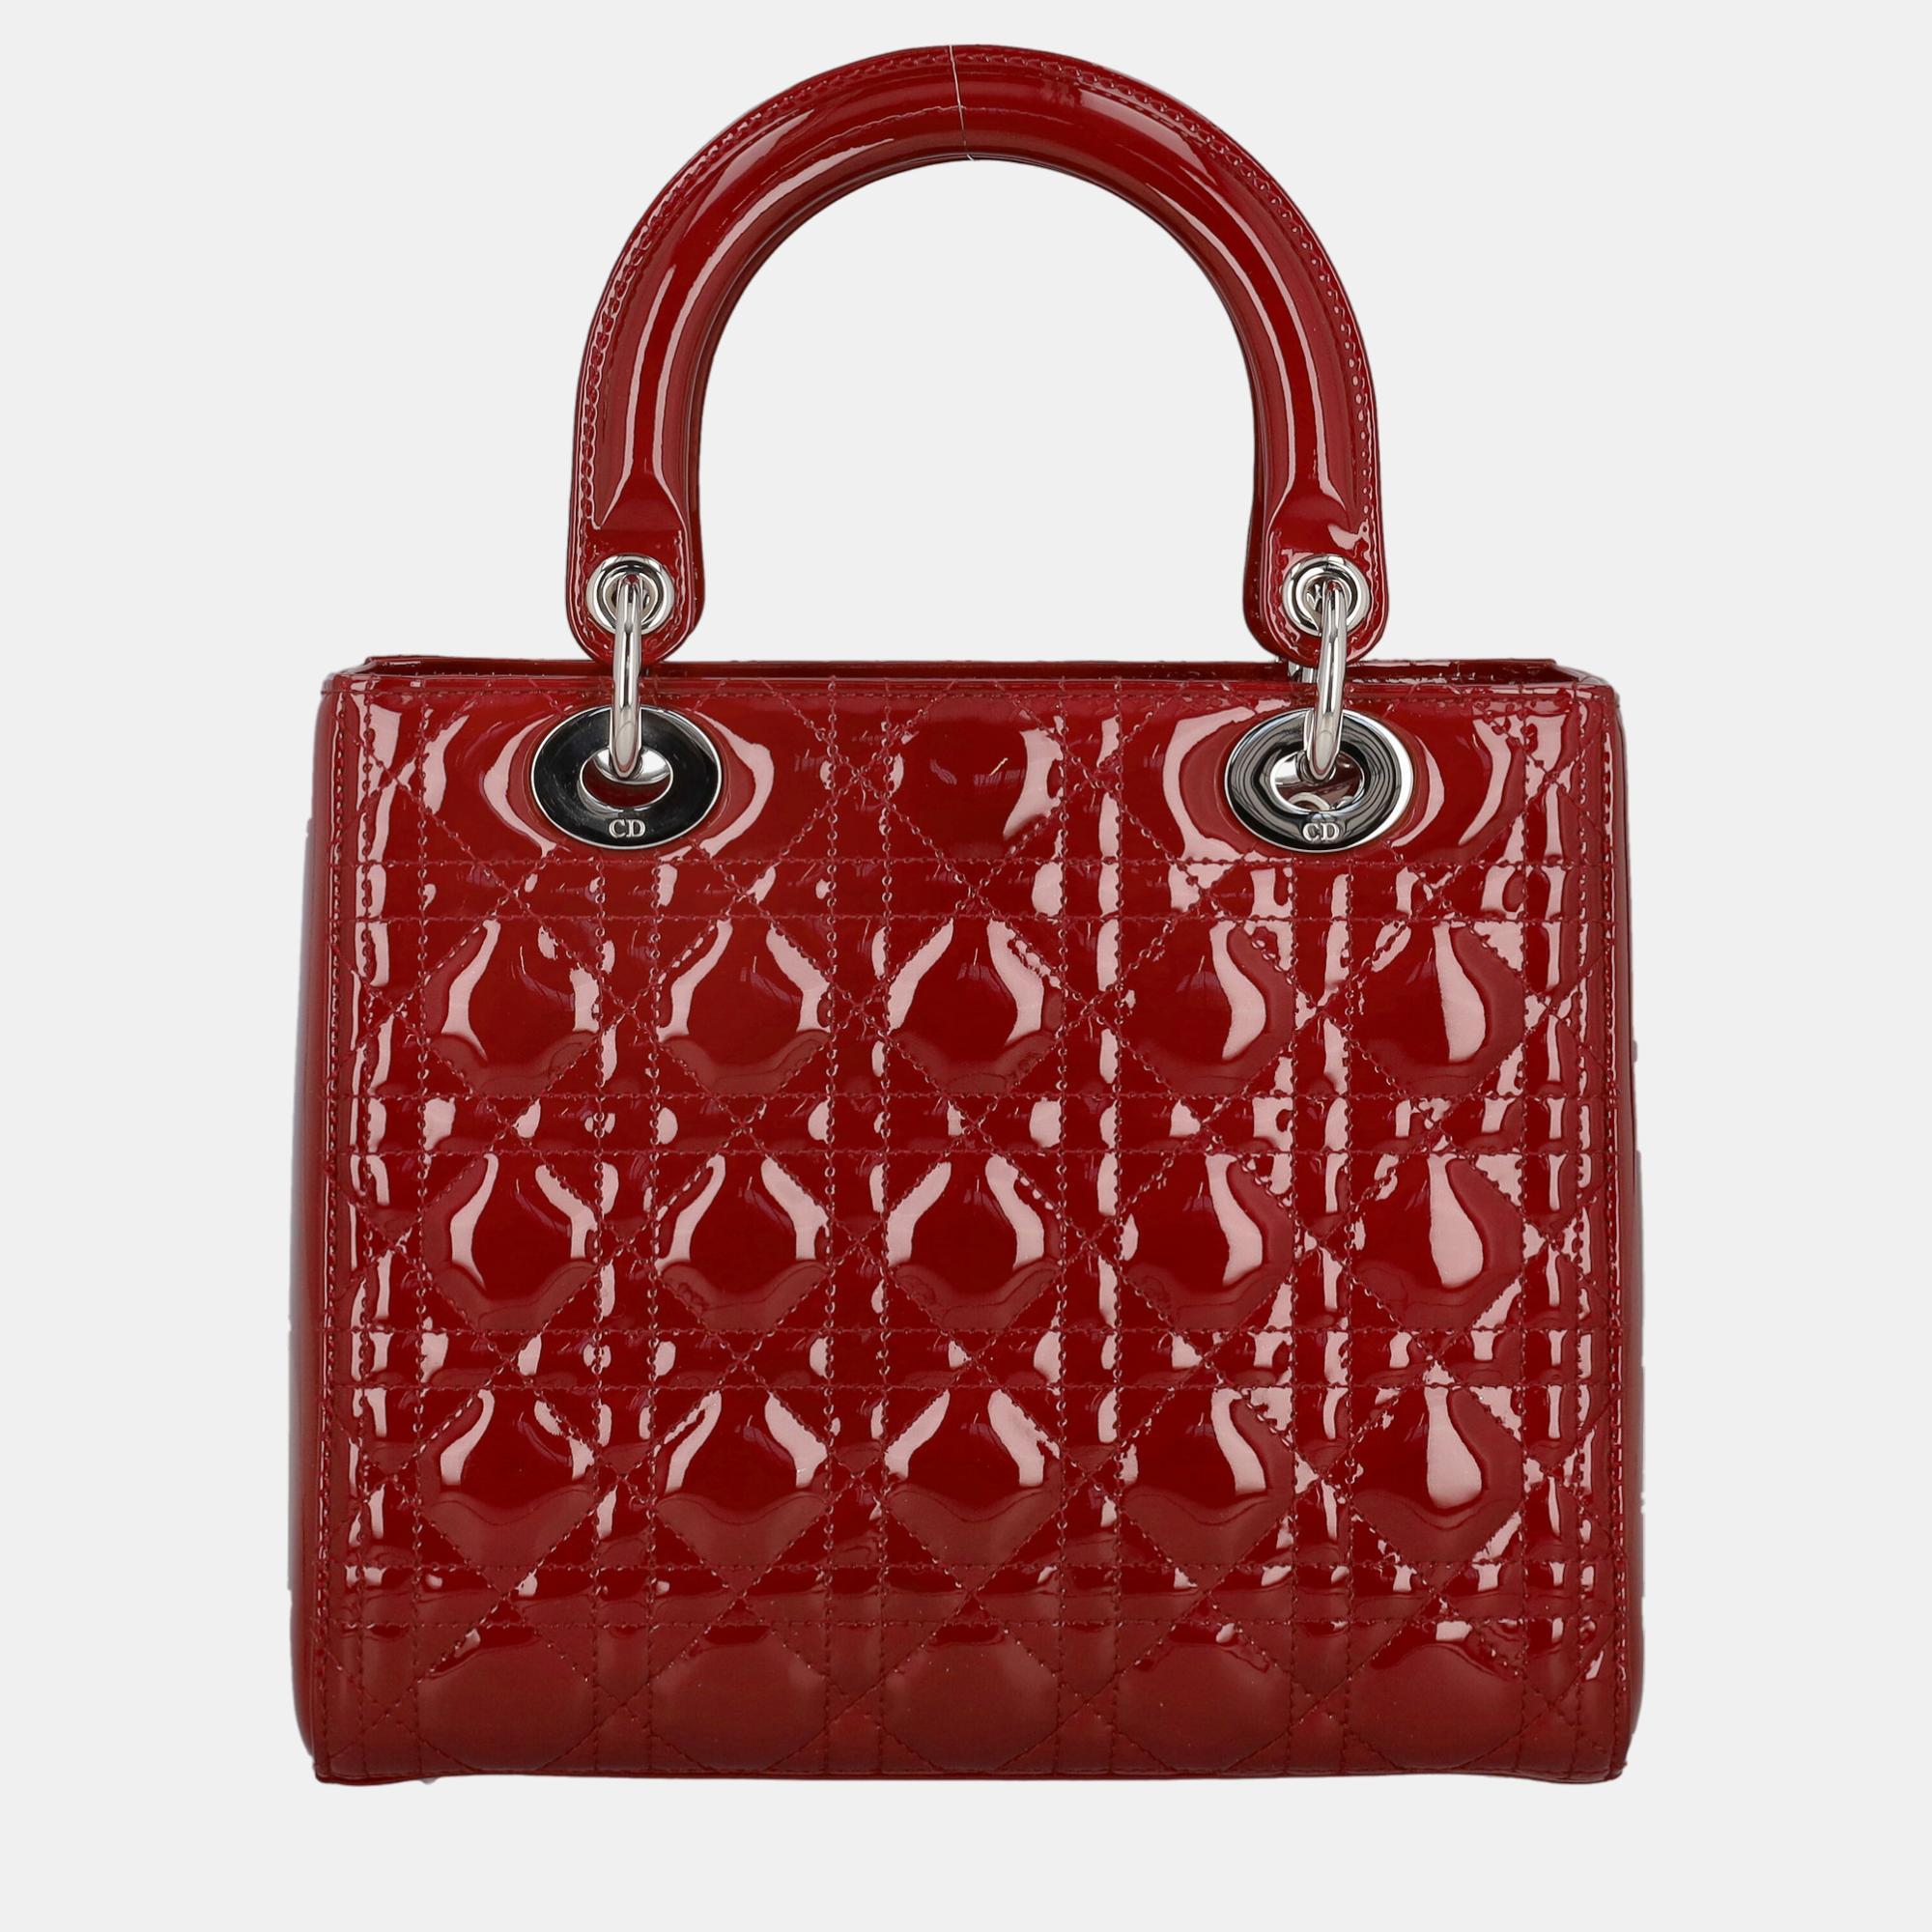 Dior Lady Dior -  Women's Leather Tote Bag - Red - One Size